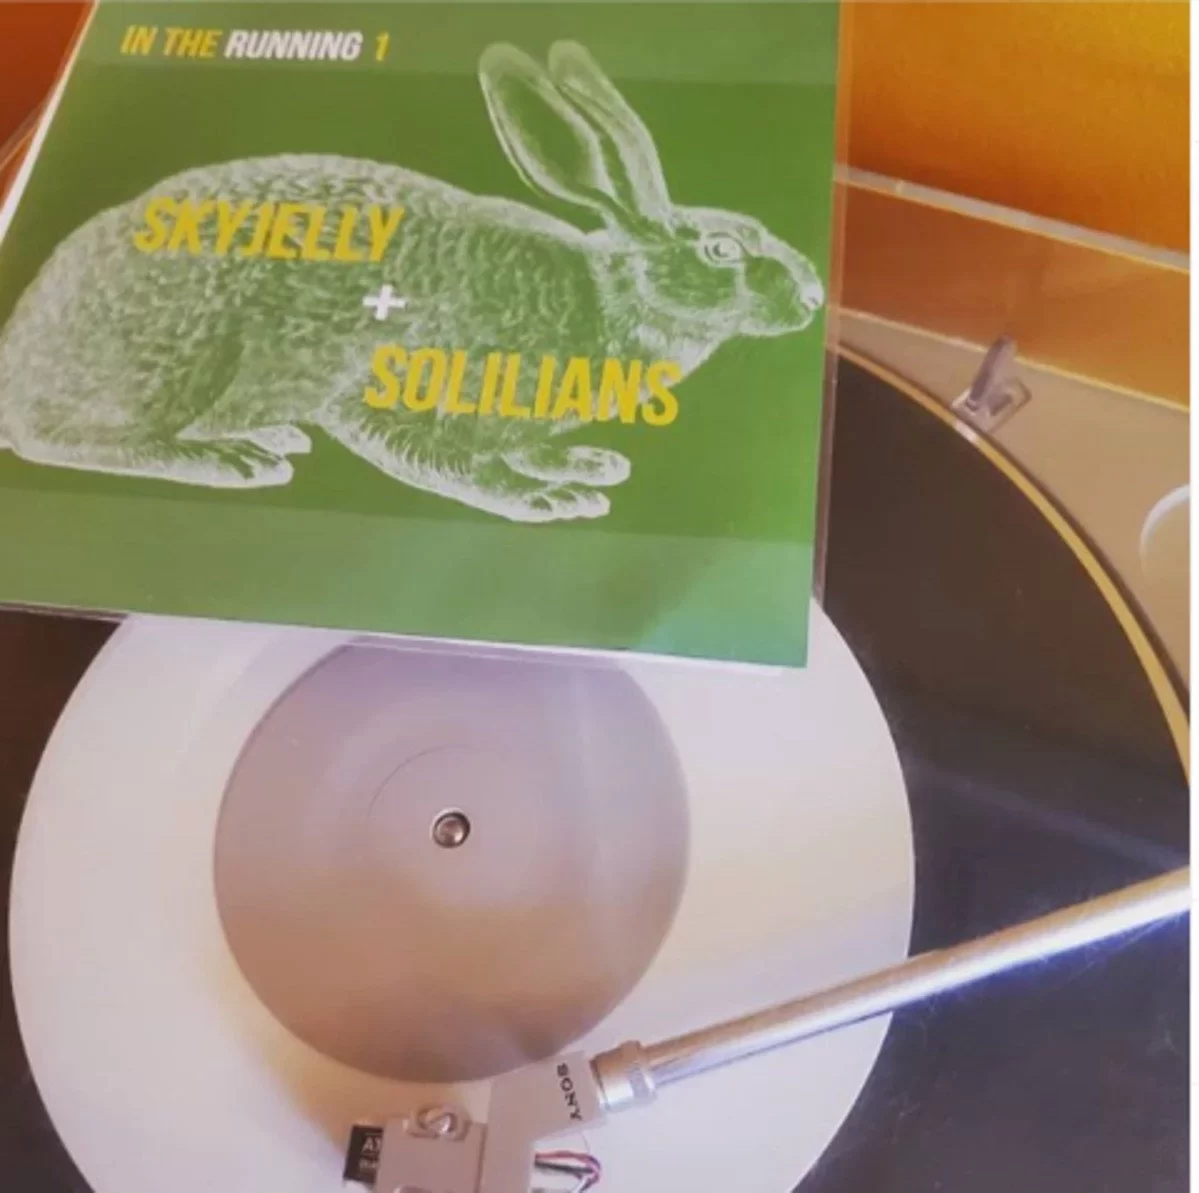 Early Bird Record Giveaway from Hassle Fest